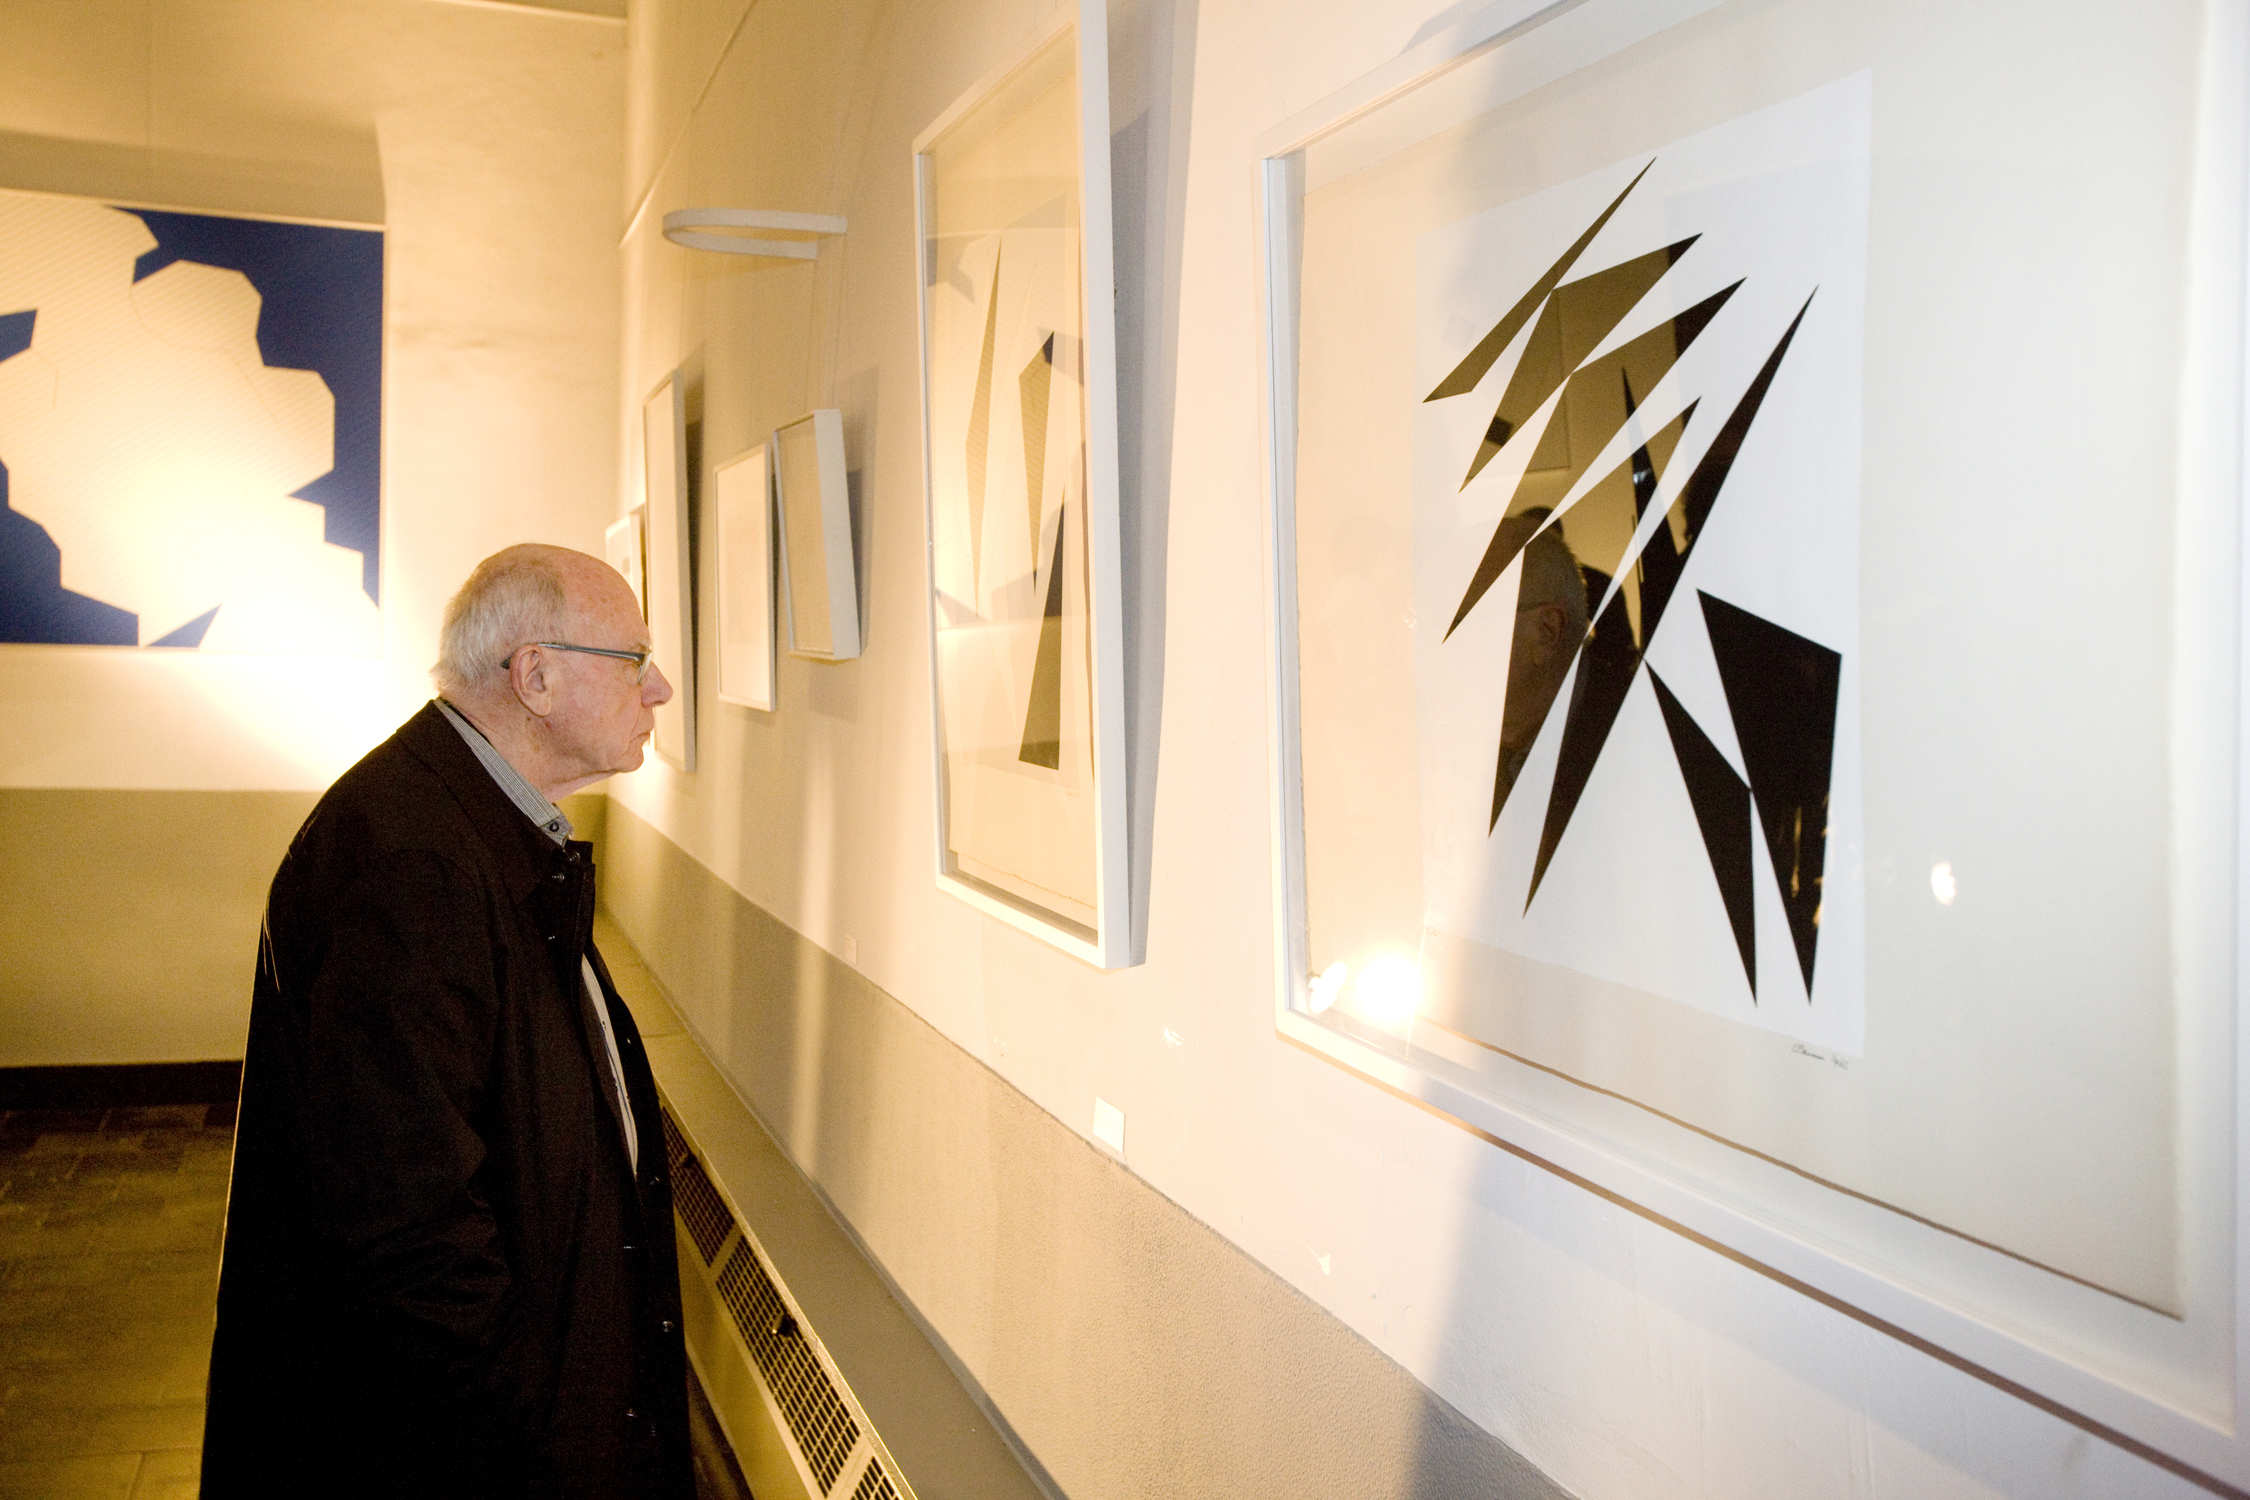 A visitor of the exhibition 'elementaire vormen' in Eeklo looks to the work of Geneviève Claisse. (photo: Grégoire De Poorter, 2013)